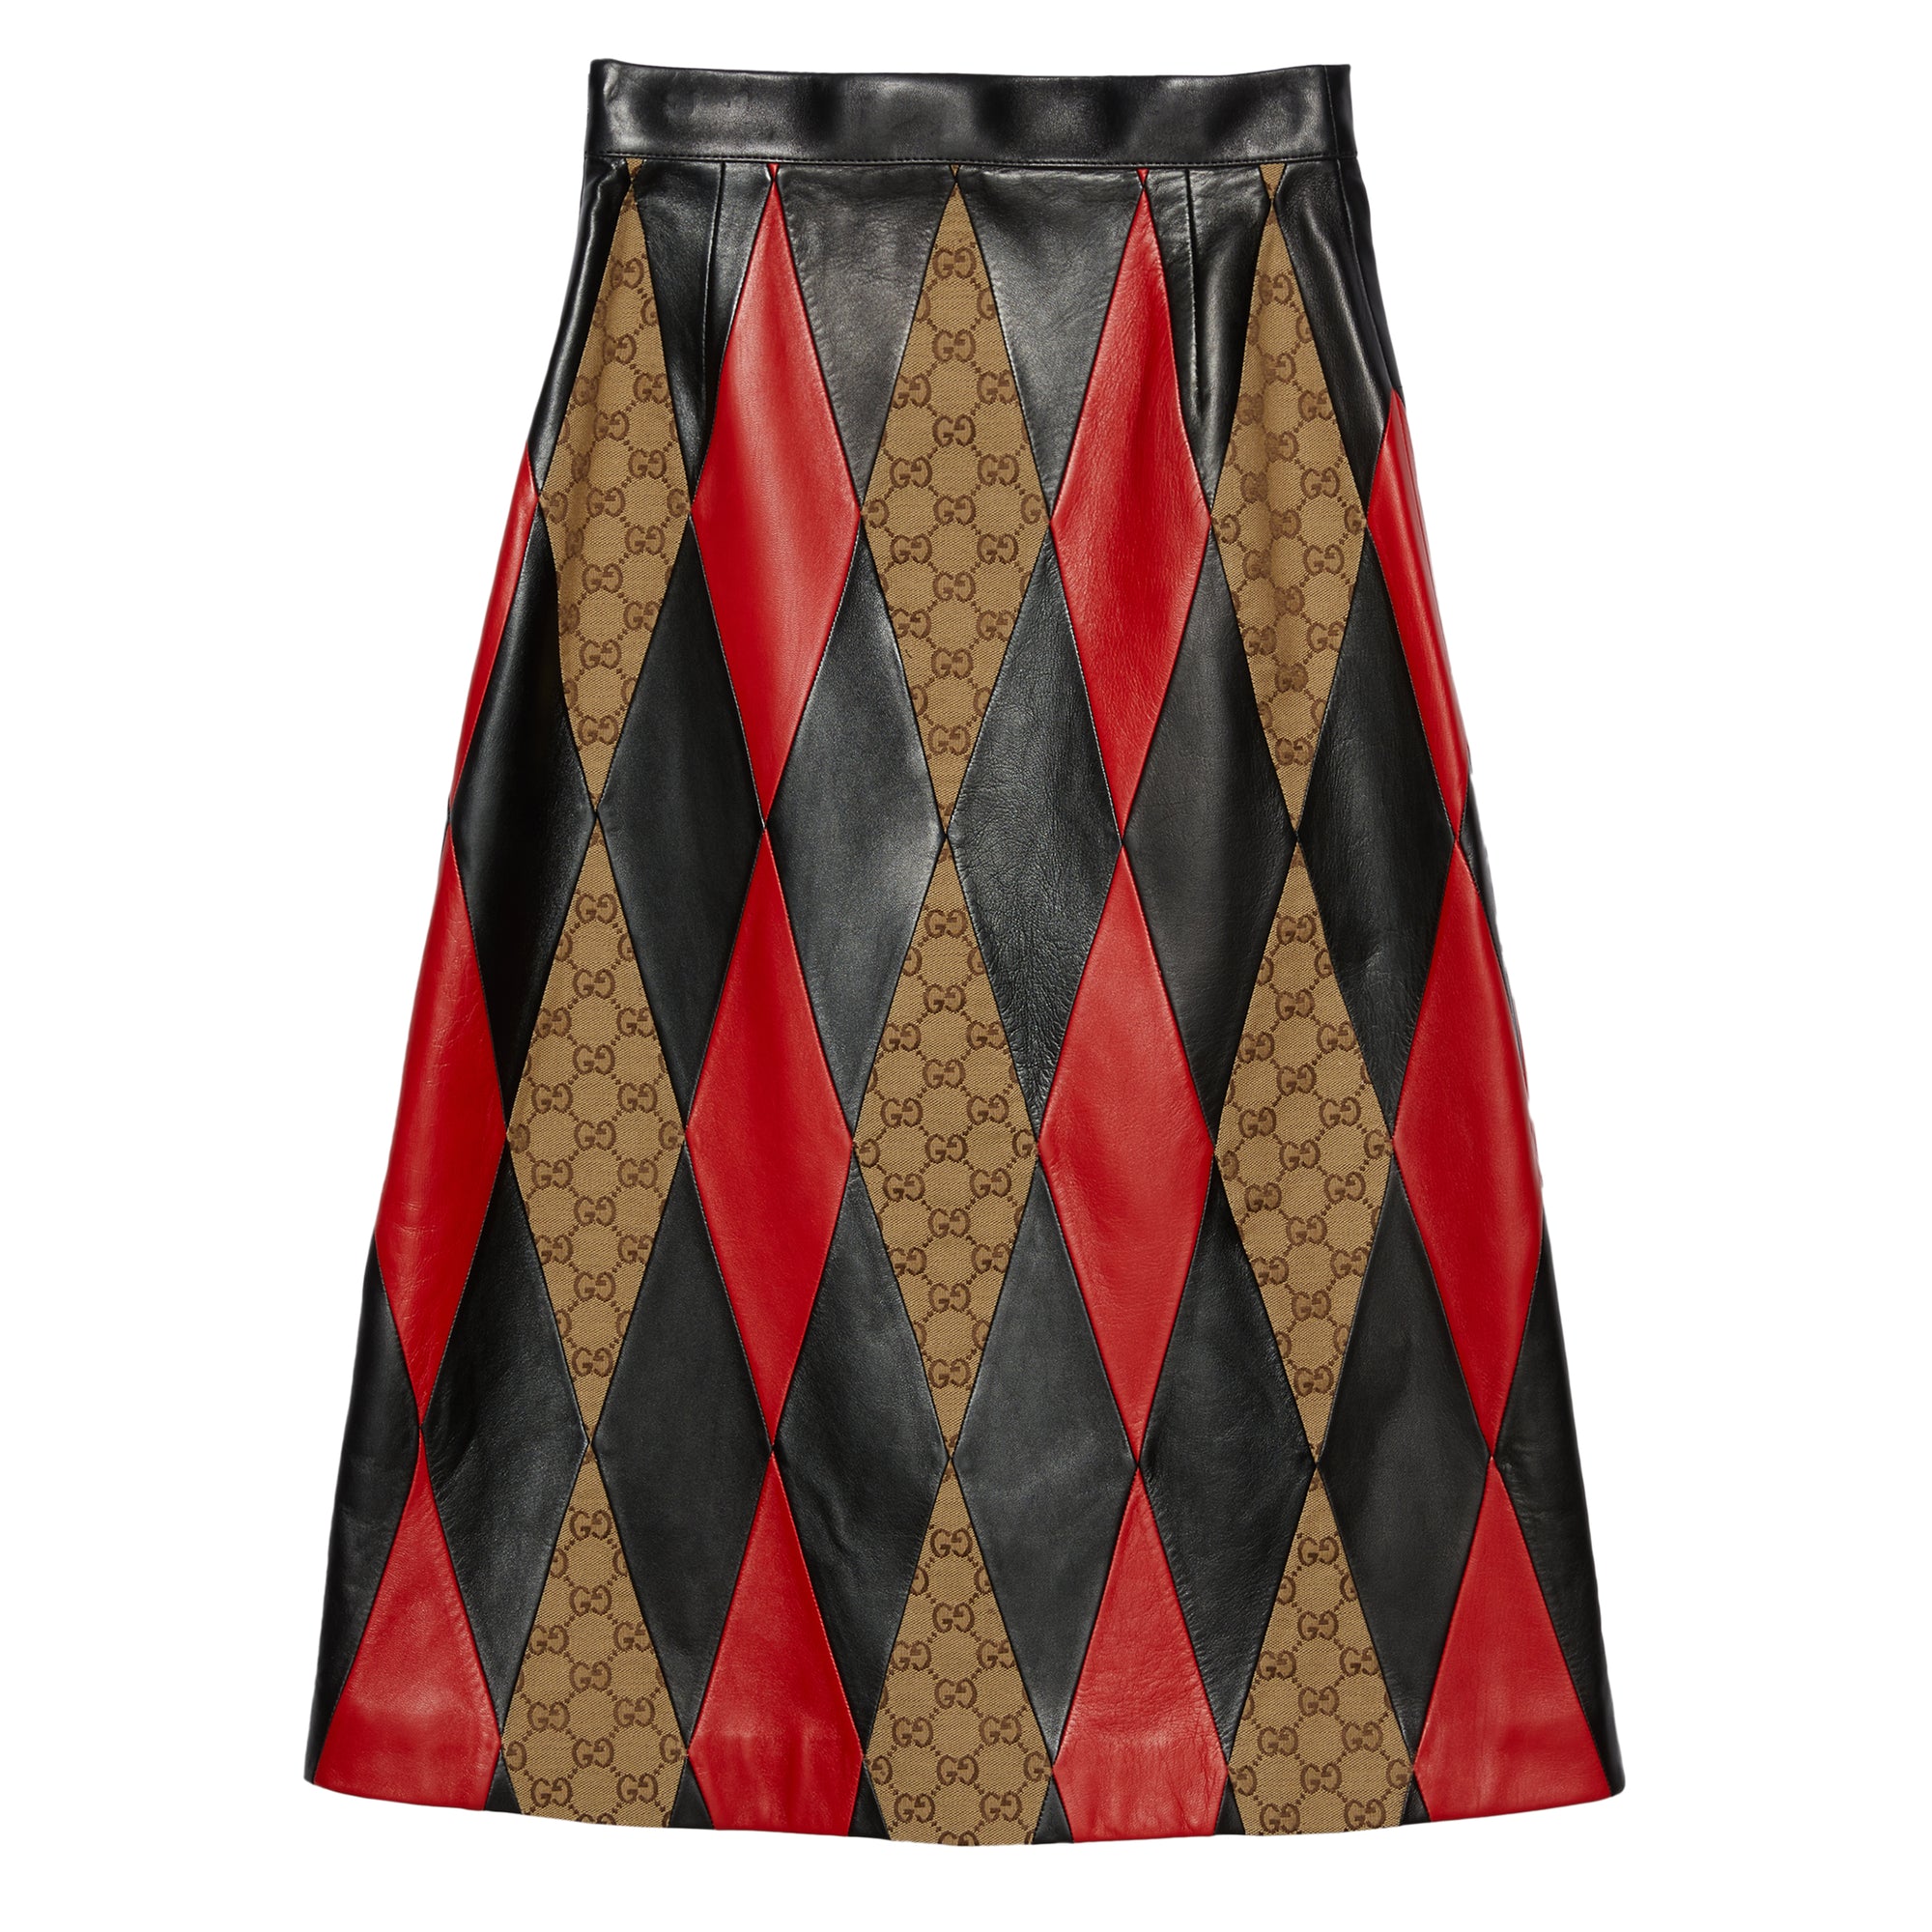 Gucci - Women’s DSM Exclusive Intarsia Leather Midi Skirt - (Black/Red) view 2